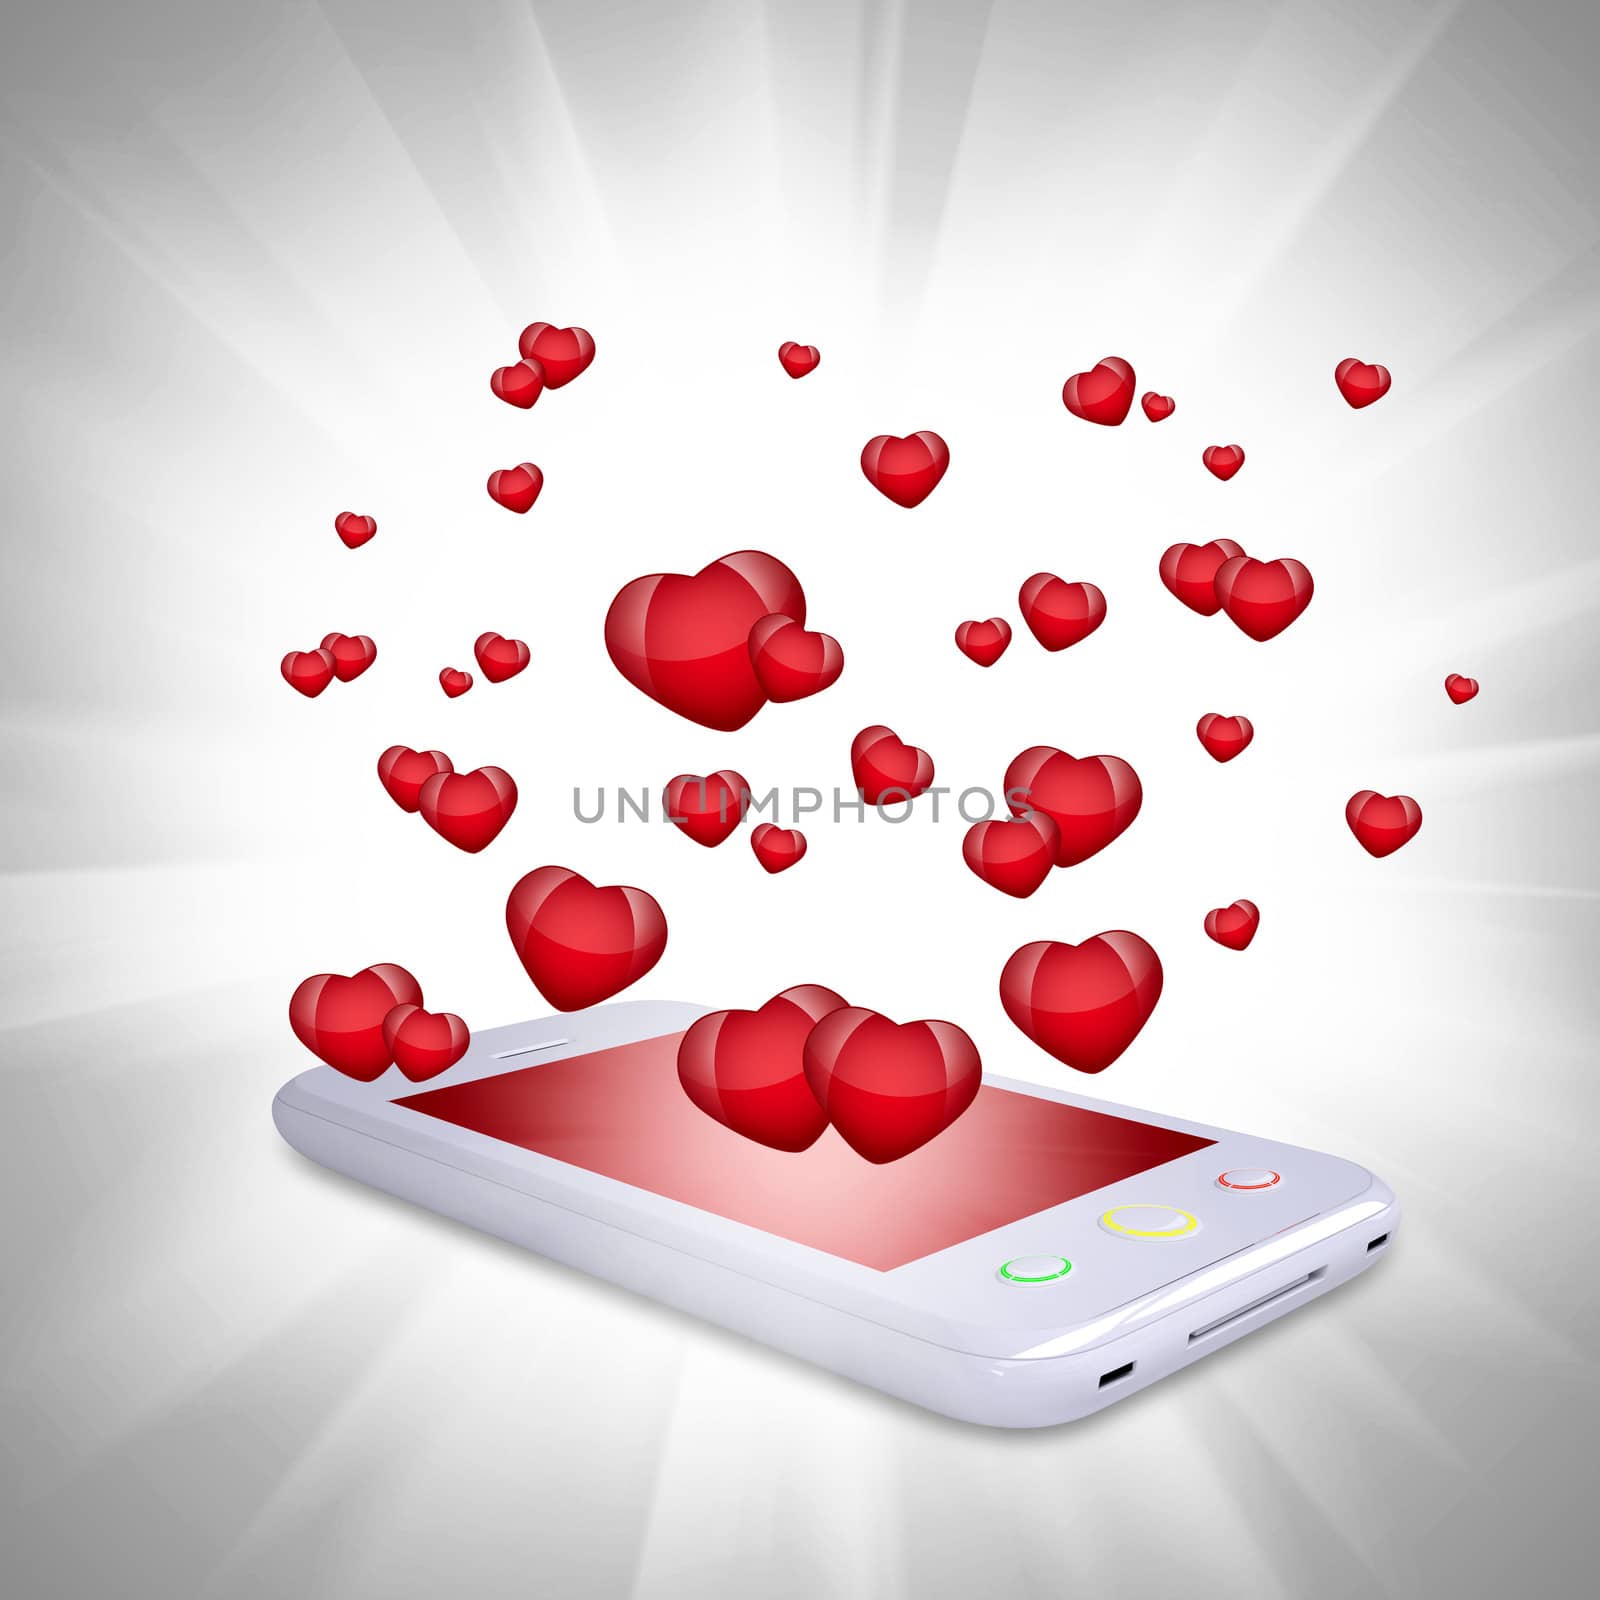 Red hearts fly out of the smartphone. Computer technology concept on Valentine's Day